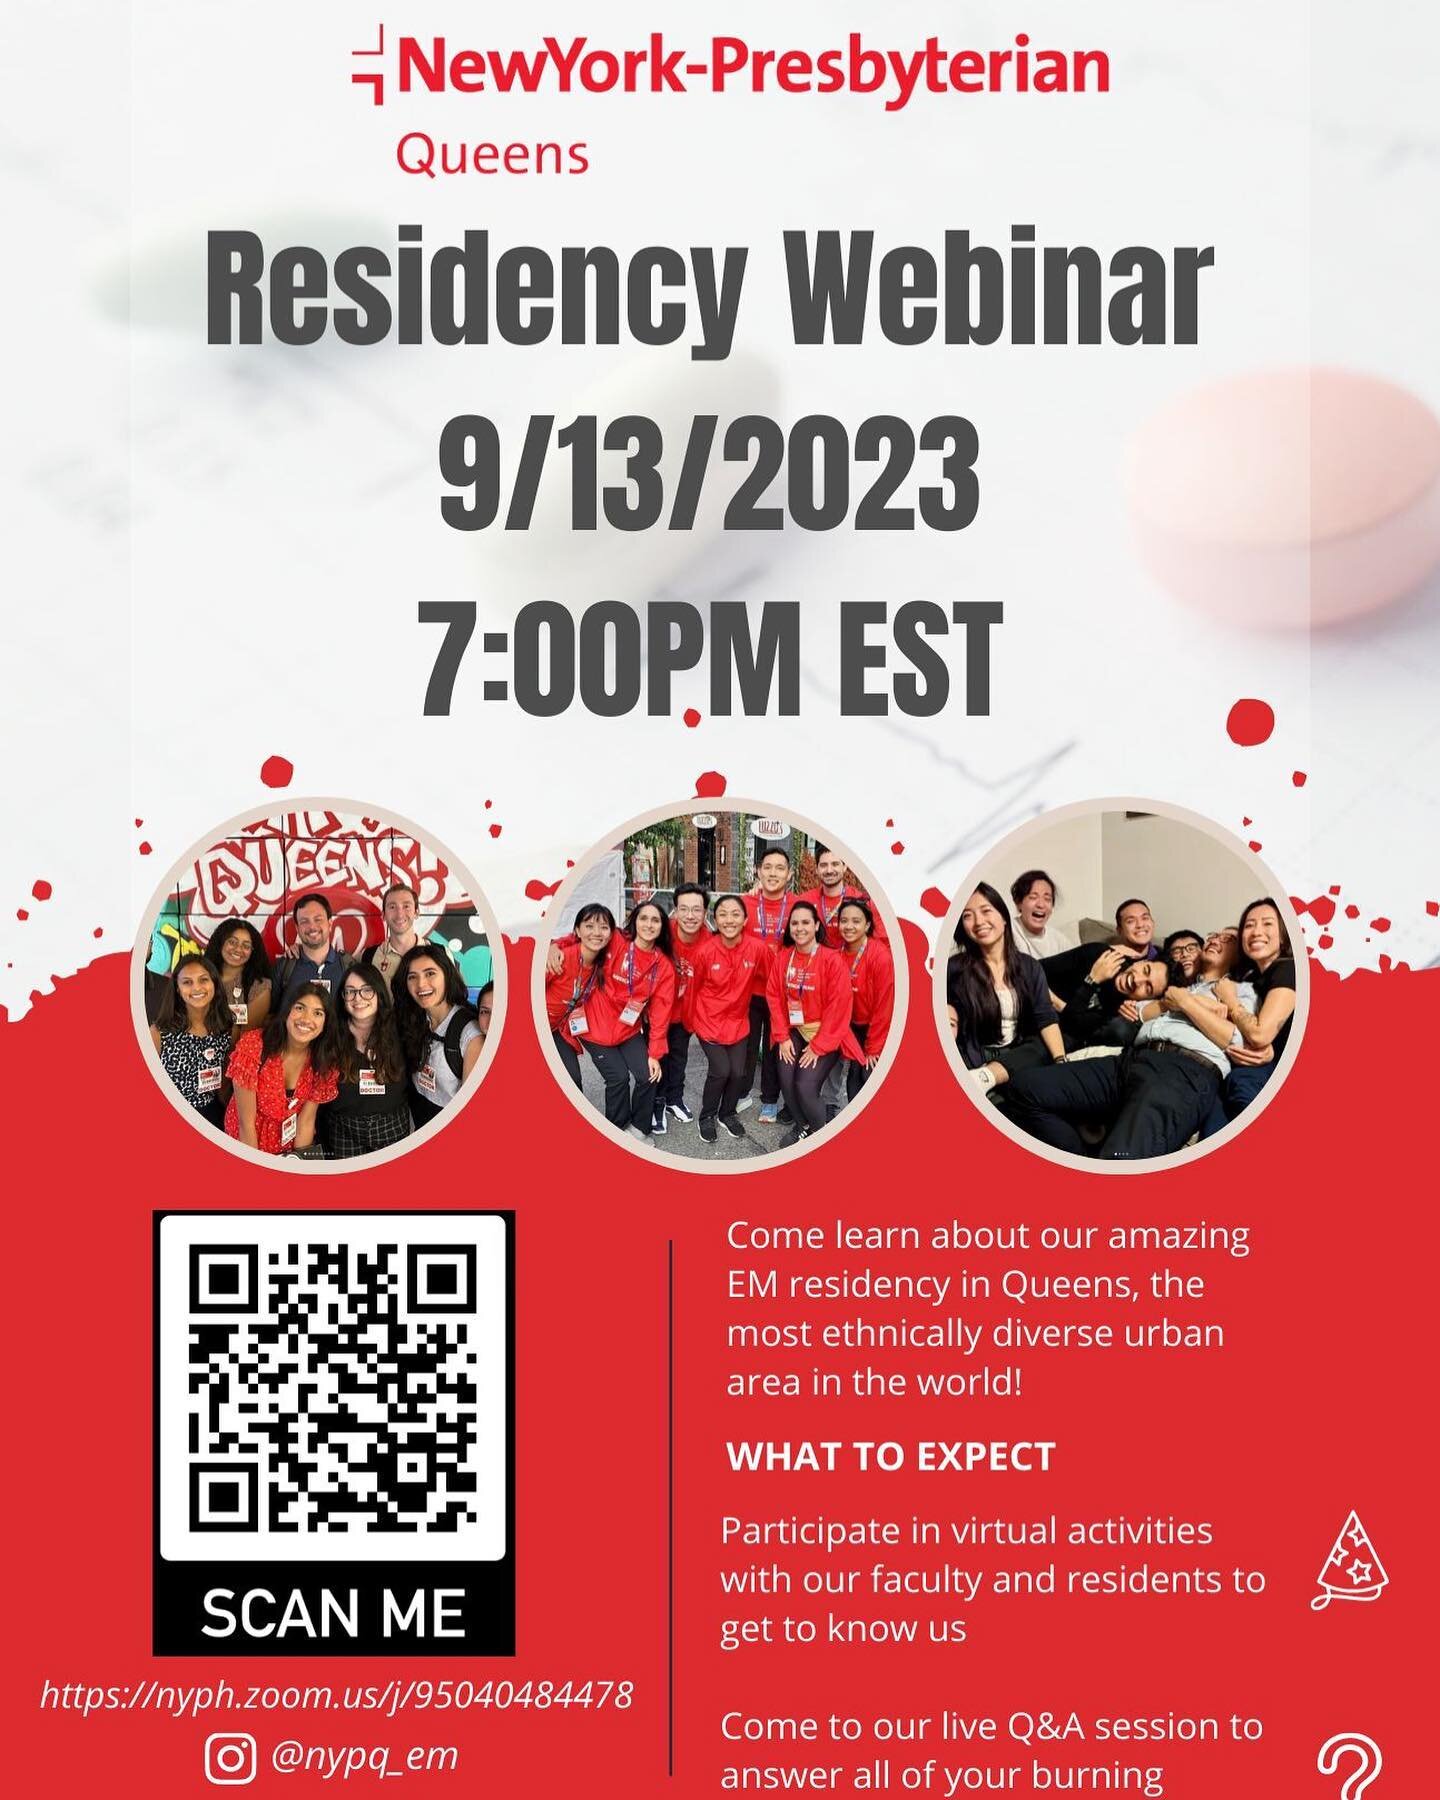 SAVE THE DATE! Come join us at our residency webinar 9/13/2023 at 7:00 PM. Meet the residents and faculty to get to know us and learn about why we love NYPQ ❤️